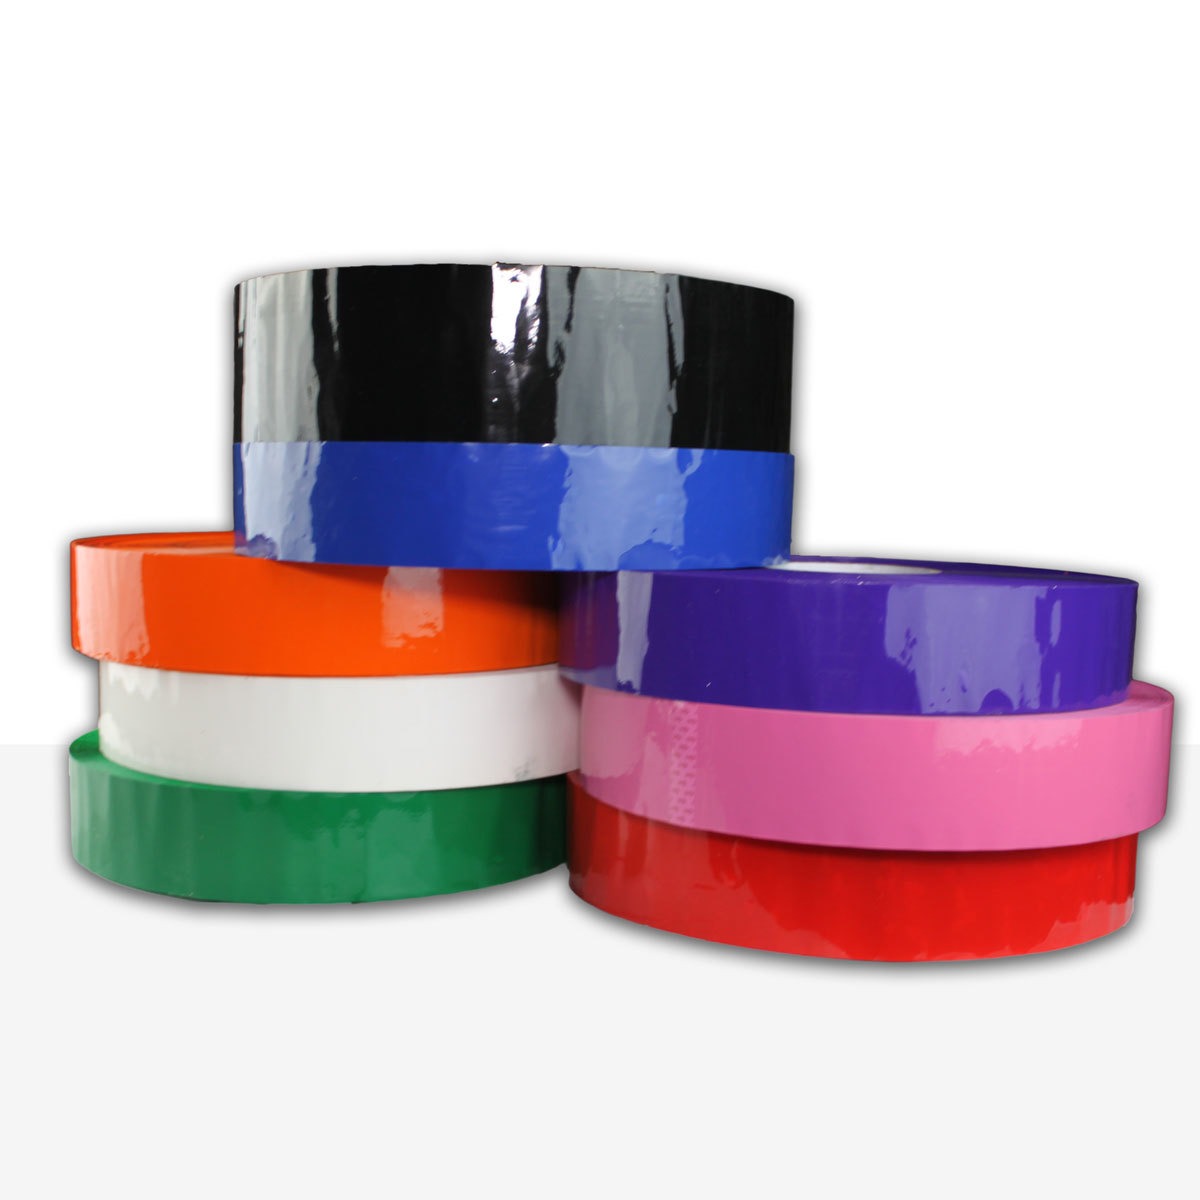 6 Colored Packing Tape, Moving Tape, 2 Inch 80 Yard 2.0 Mil Thick,(6 Rolls  Red,Yellow,Green,Orange,Blue,White) (12)